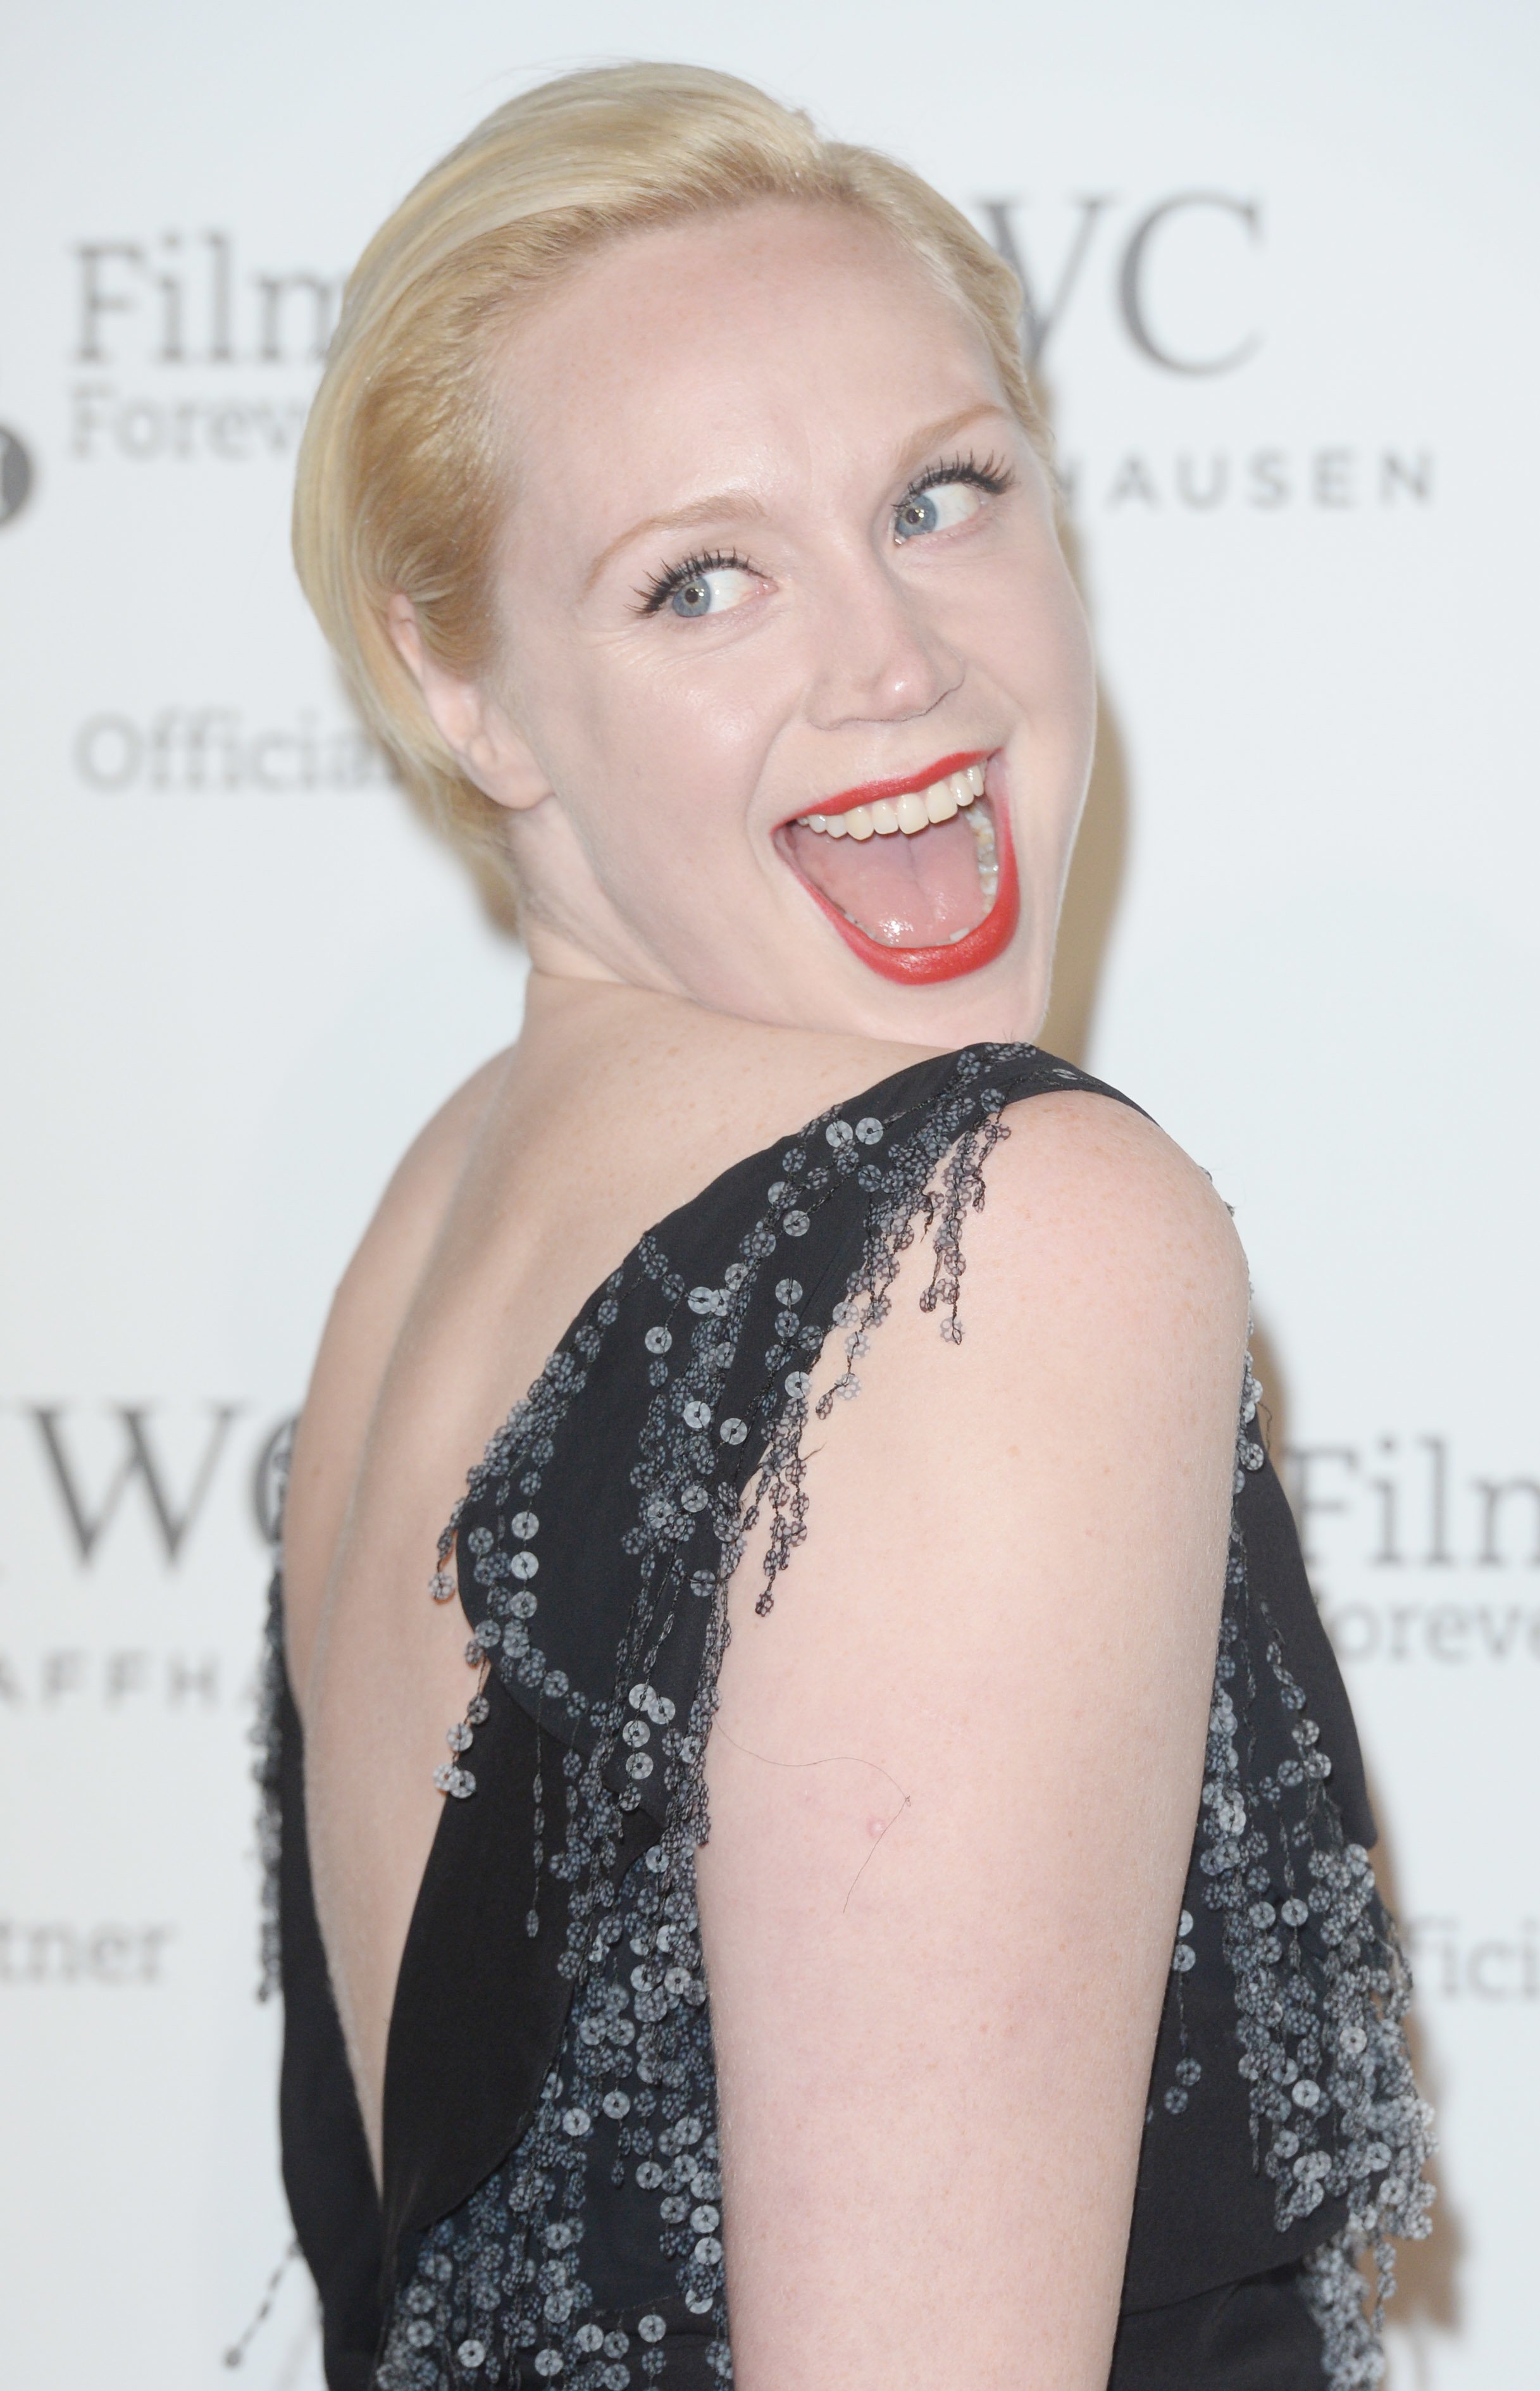 Gwendoline Christie poses at the "IWC Gala" in London | Source: Getty Images